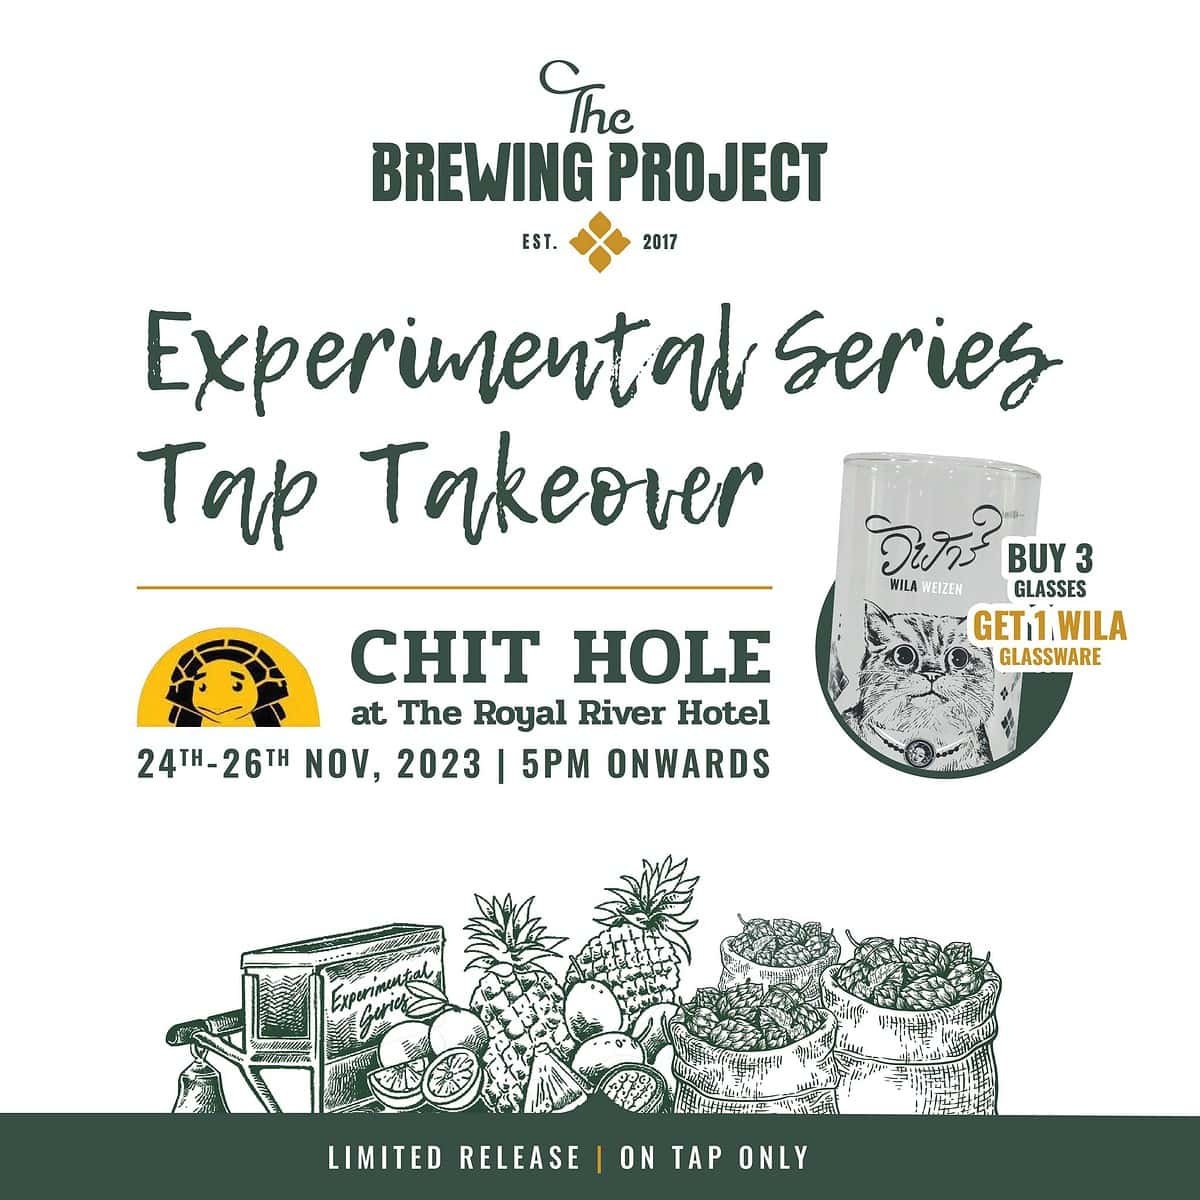 Brewing Project is doing an experimental Series tap takeover at Chit Hole. Thai craft beer